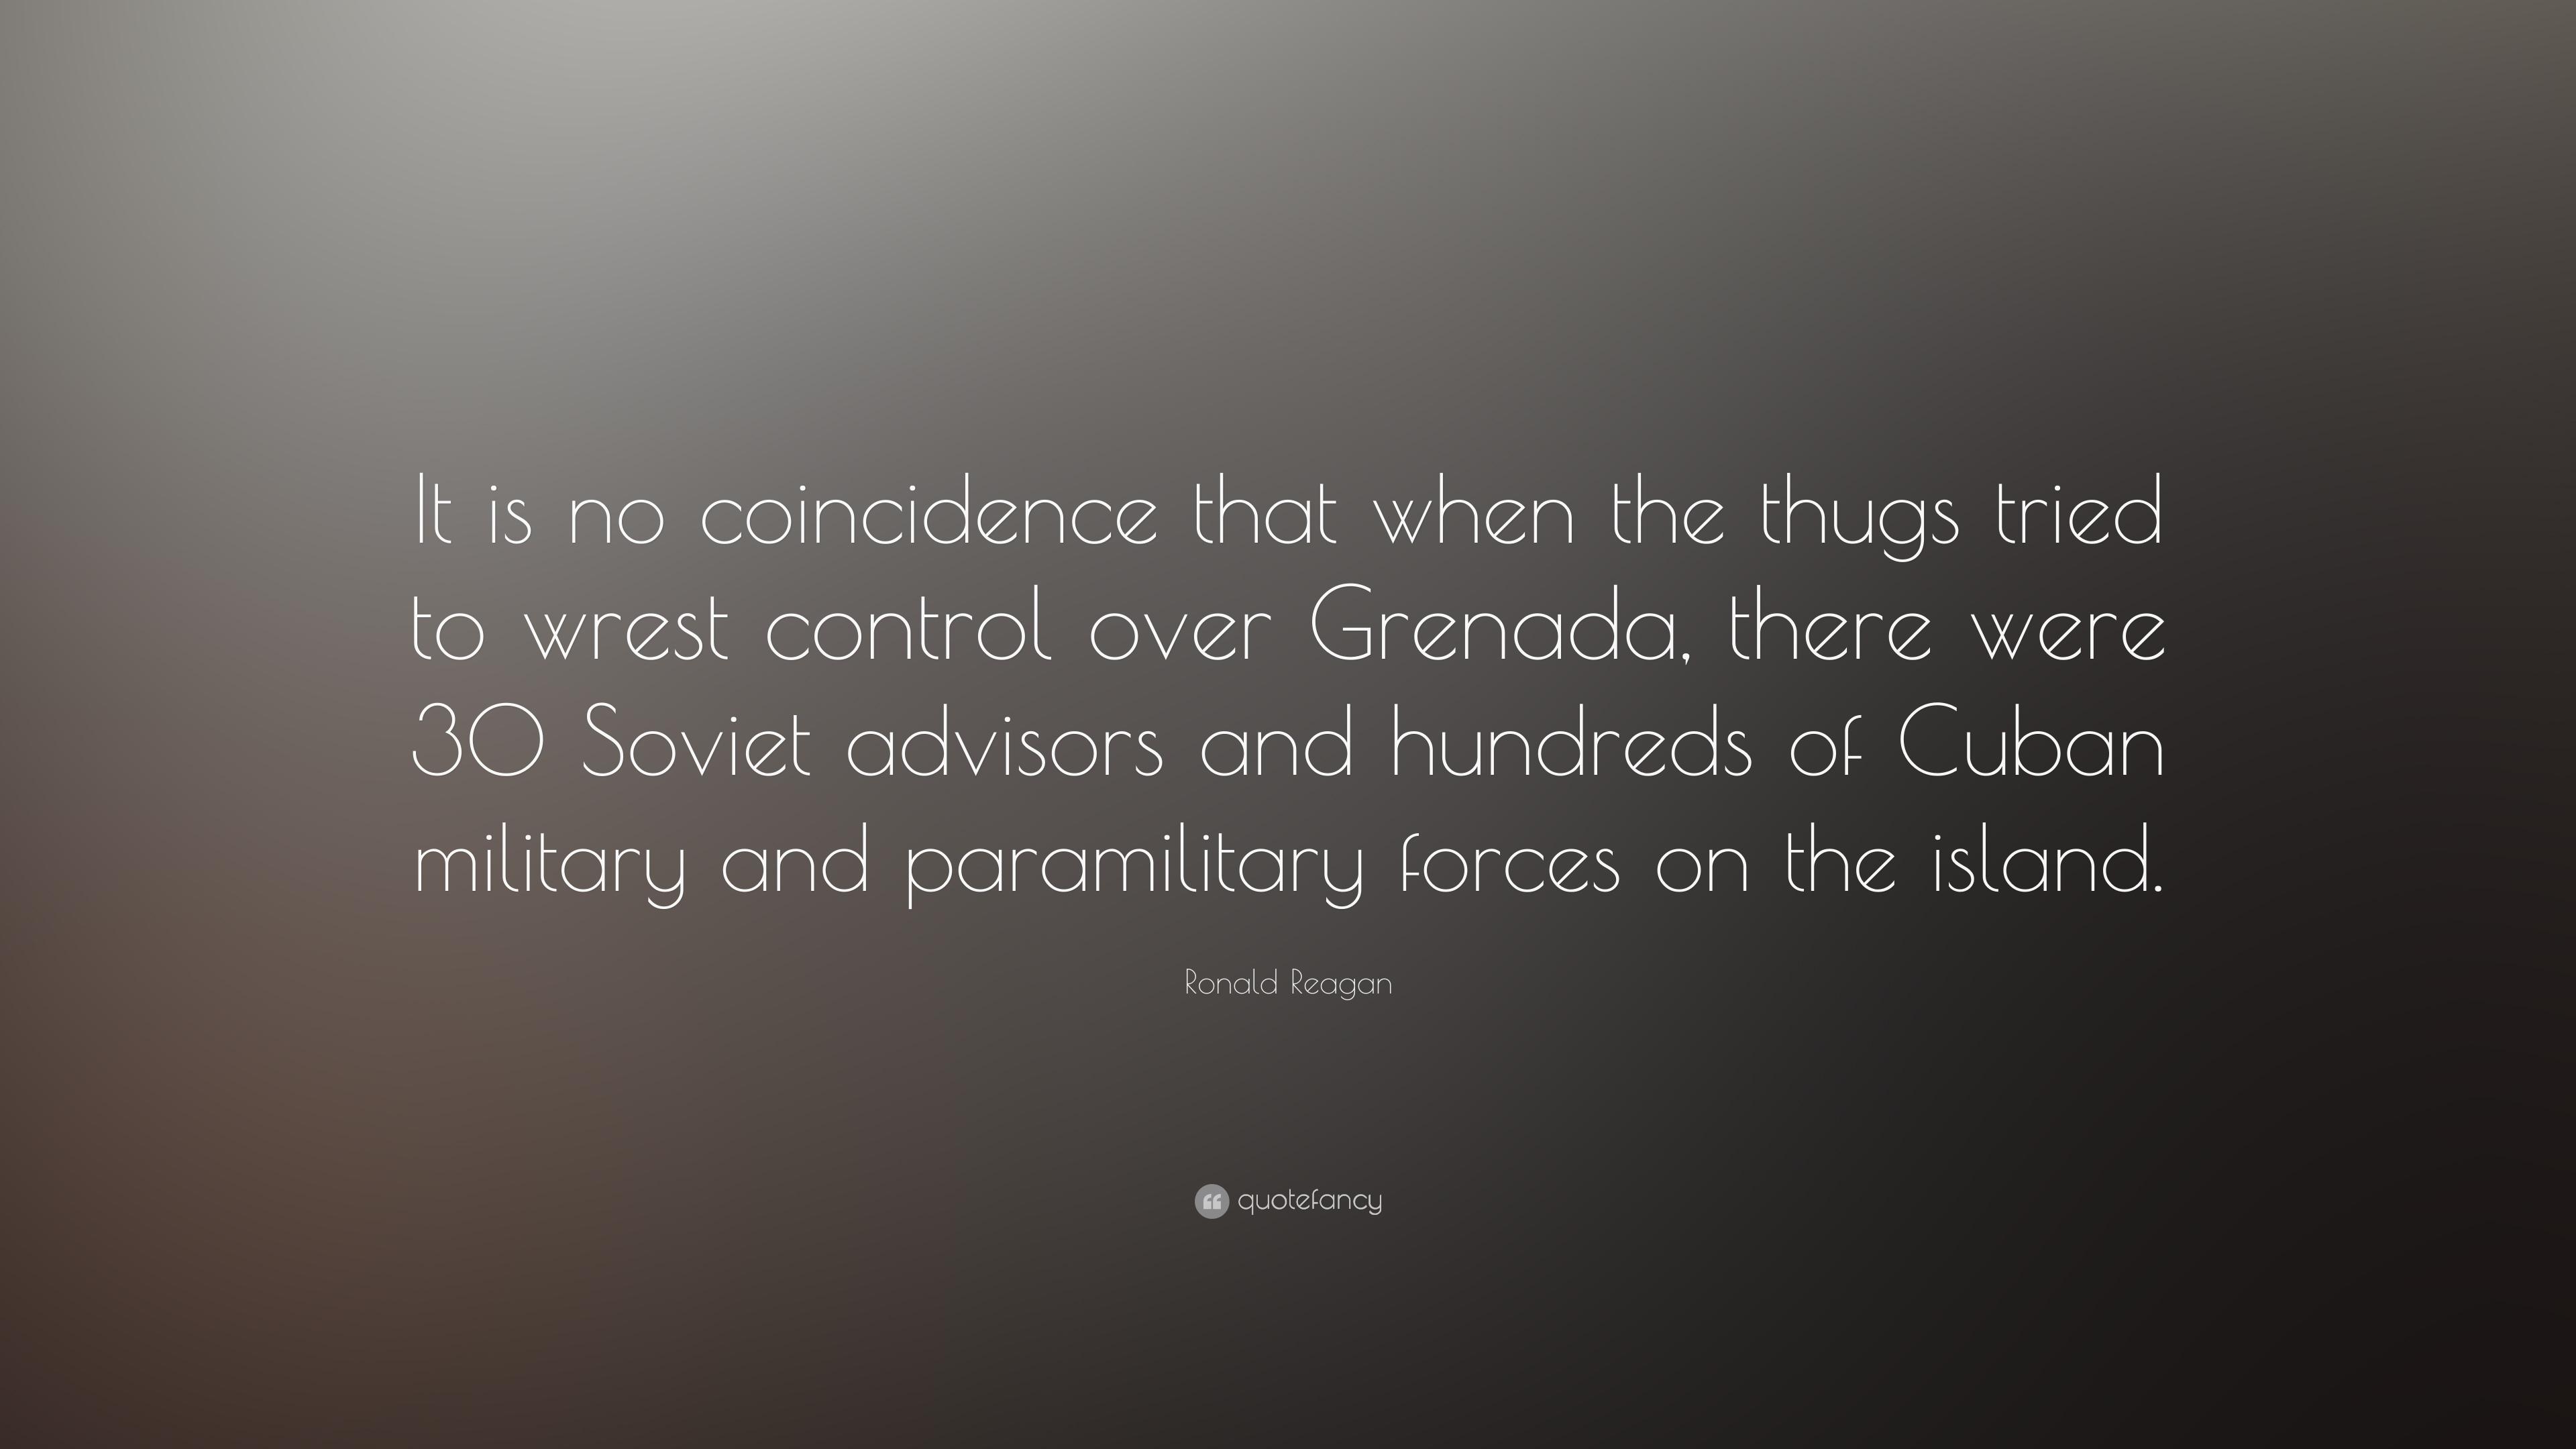 Ronald Reagan Quote: “It is no coincidence that when the thugs tried